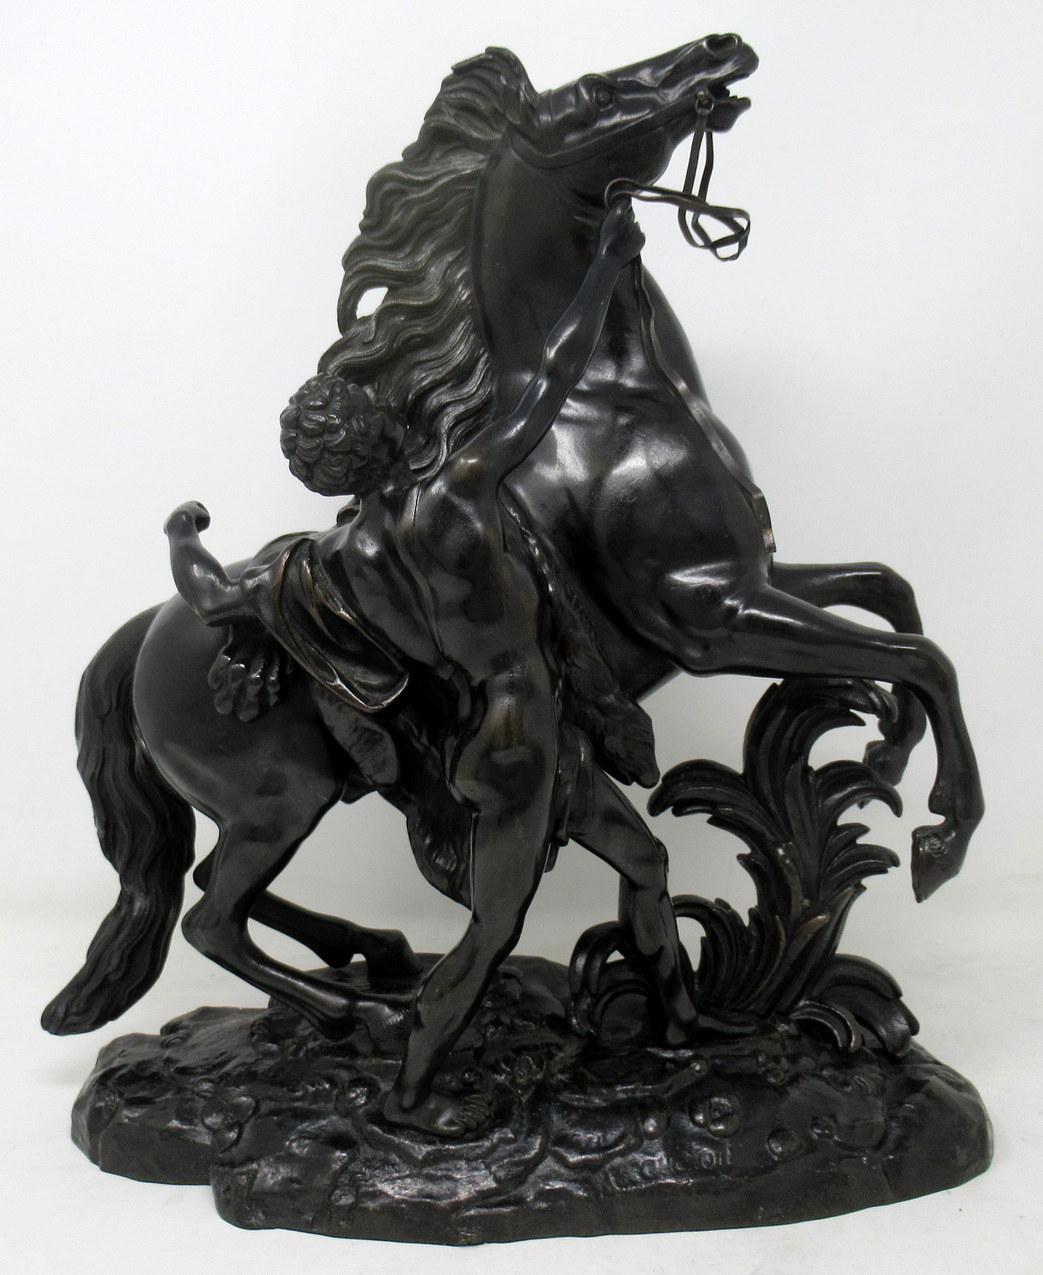 Very fine pair of well cast French Patinated Bronze Representations of the Famous Marley Horses after Guillaume Coustou (French 1677-1746) from the Carrara marble life size originals which were commissioned by Louis XVI for his horse pond at his